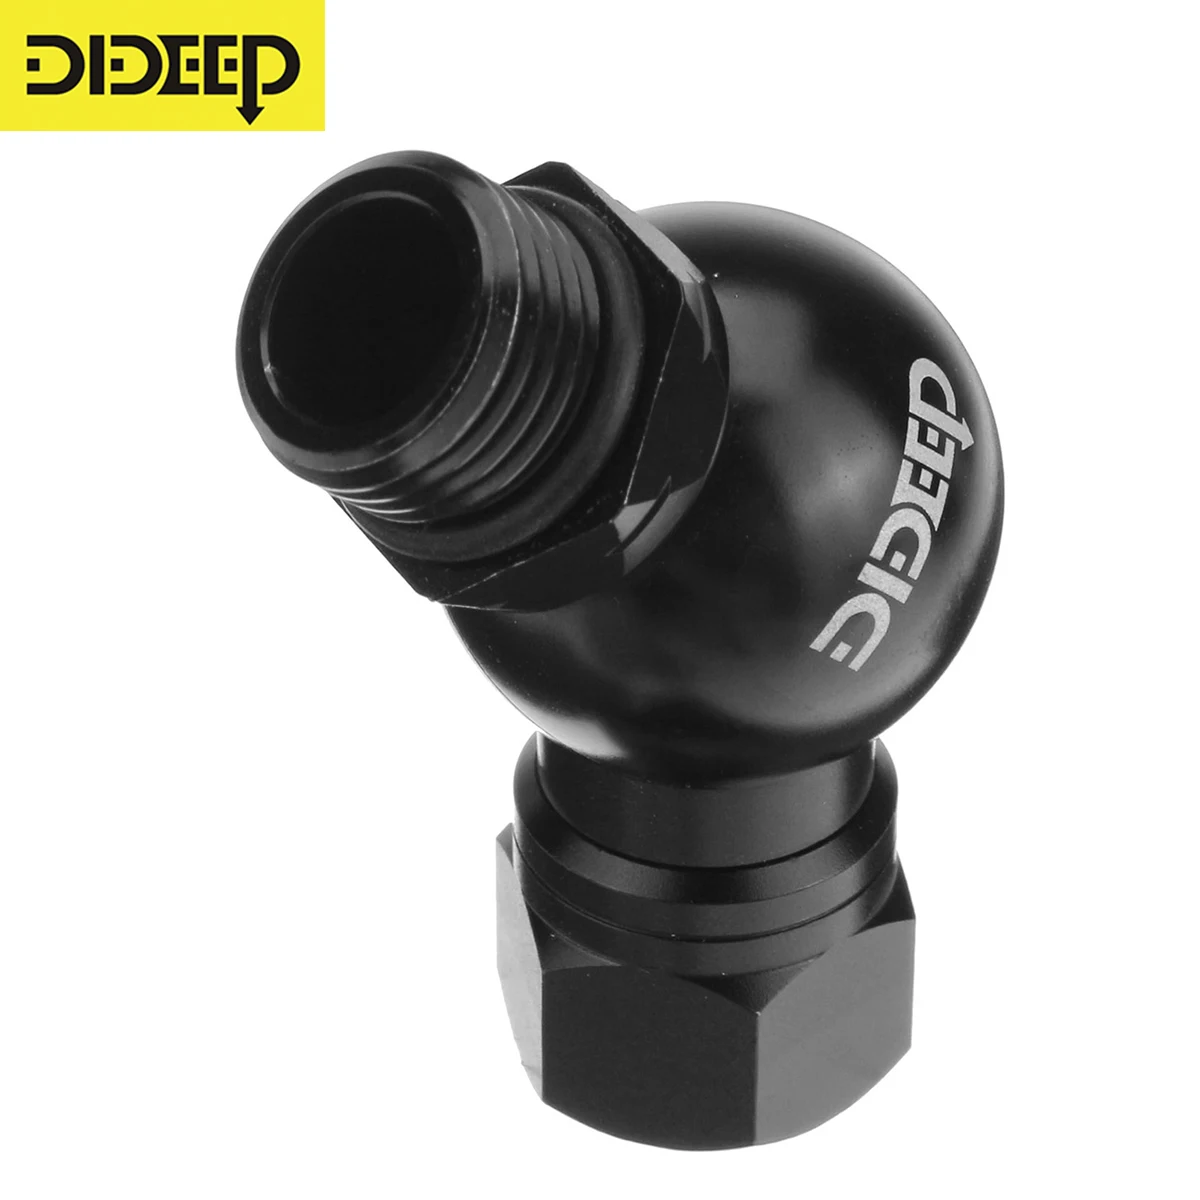 New 360 Degree Swivel Low Pressure Hose Adapter for 2nd Stage Scuba Diving Re... 